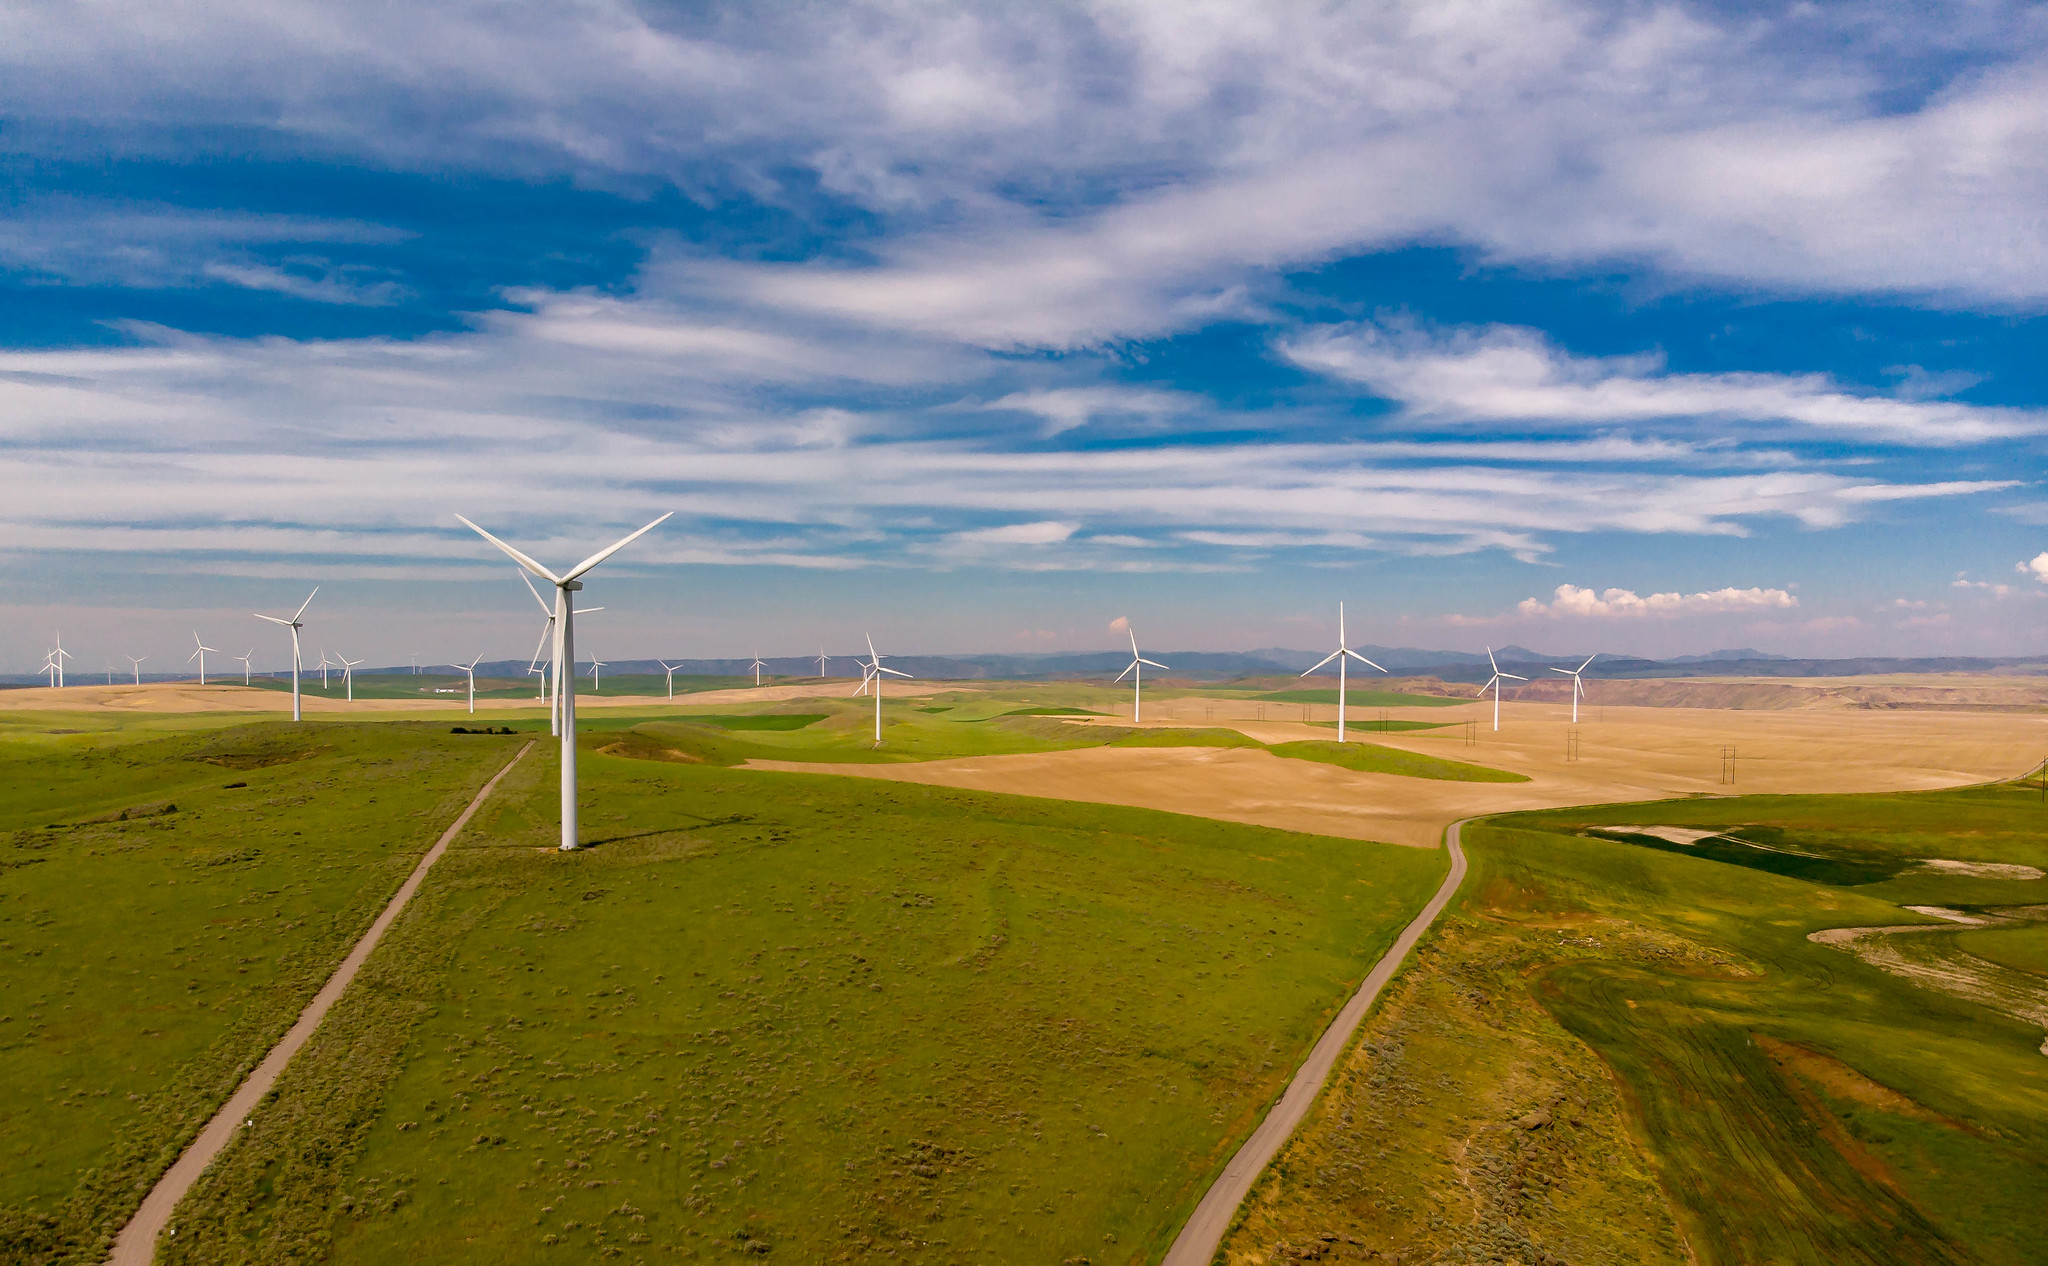 Photograph of a wind farm near Idaho Falls, Idaho. The photo shows a float landscape stretching to the horizon covered in patches of green and yellow vegetation. The landscape is dotted with white wind turbines. The sky above is blue with wispy clouds.